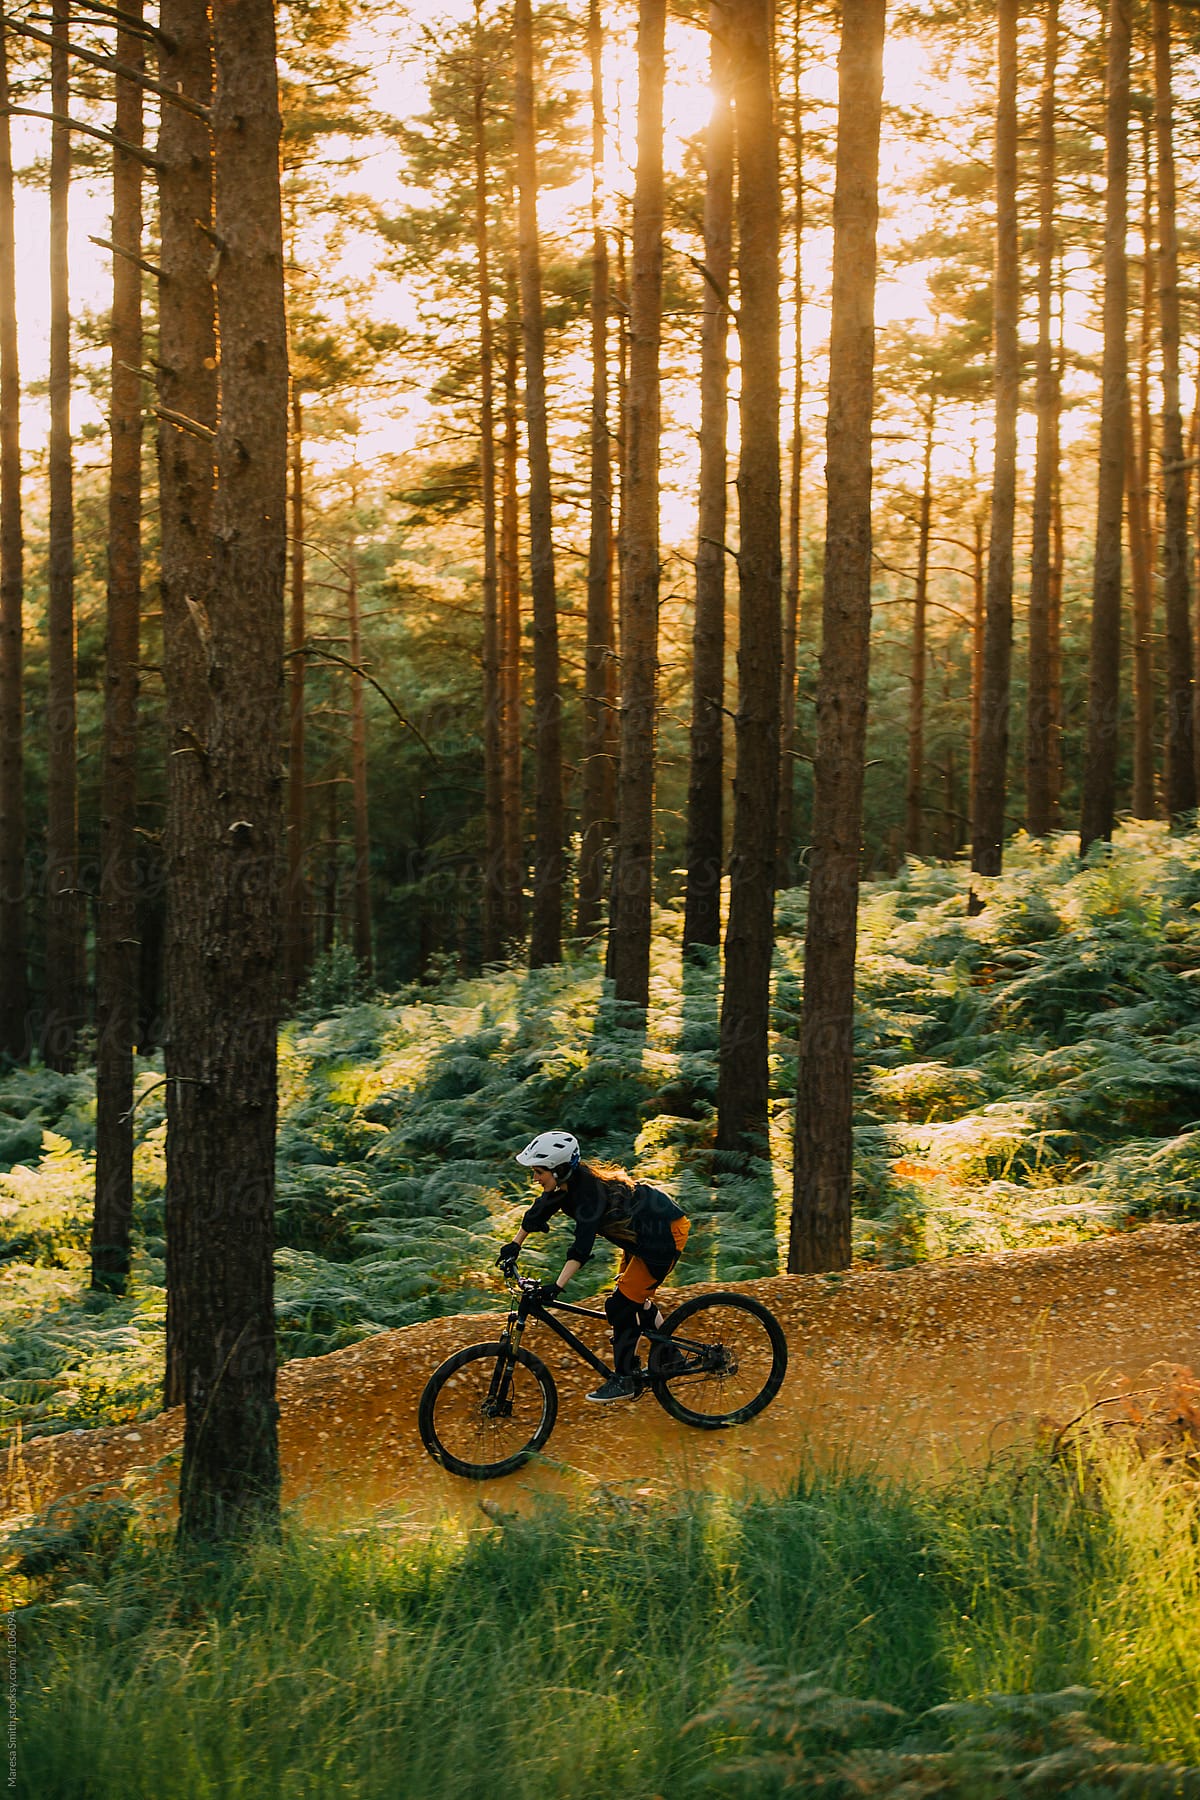 A woman cycling down a sandy forest path at sunset